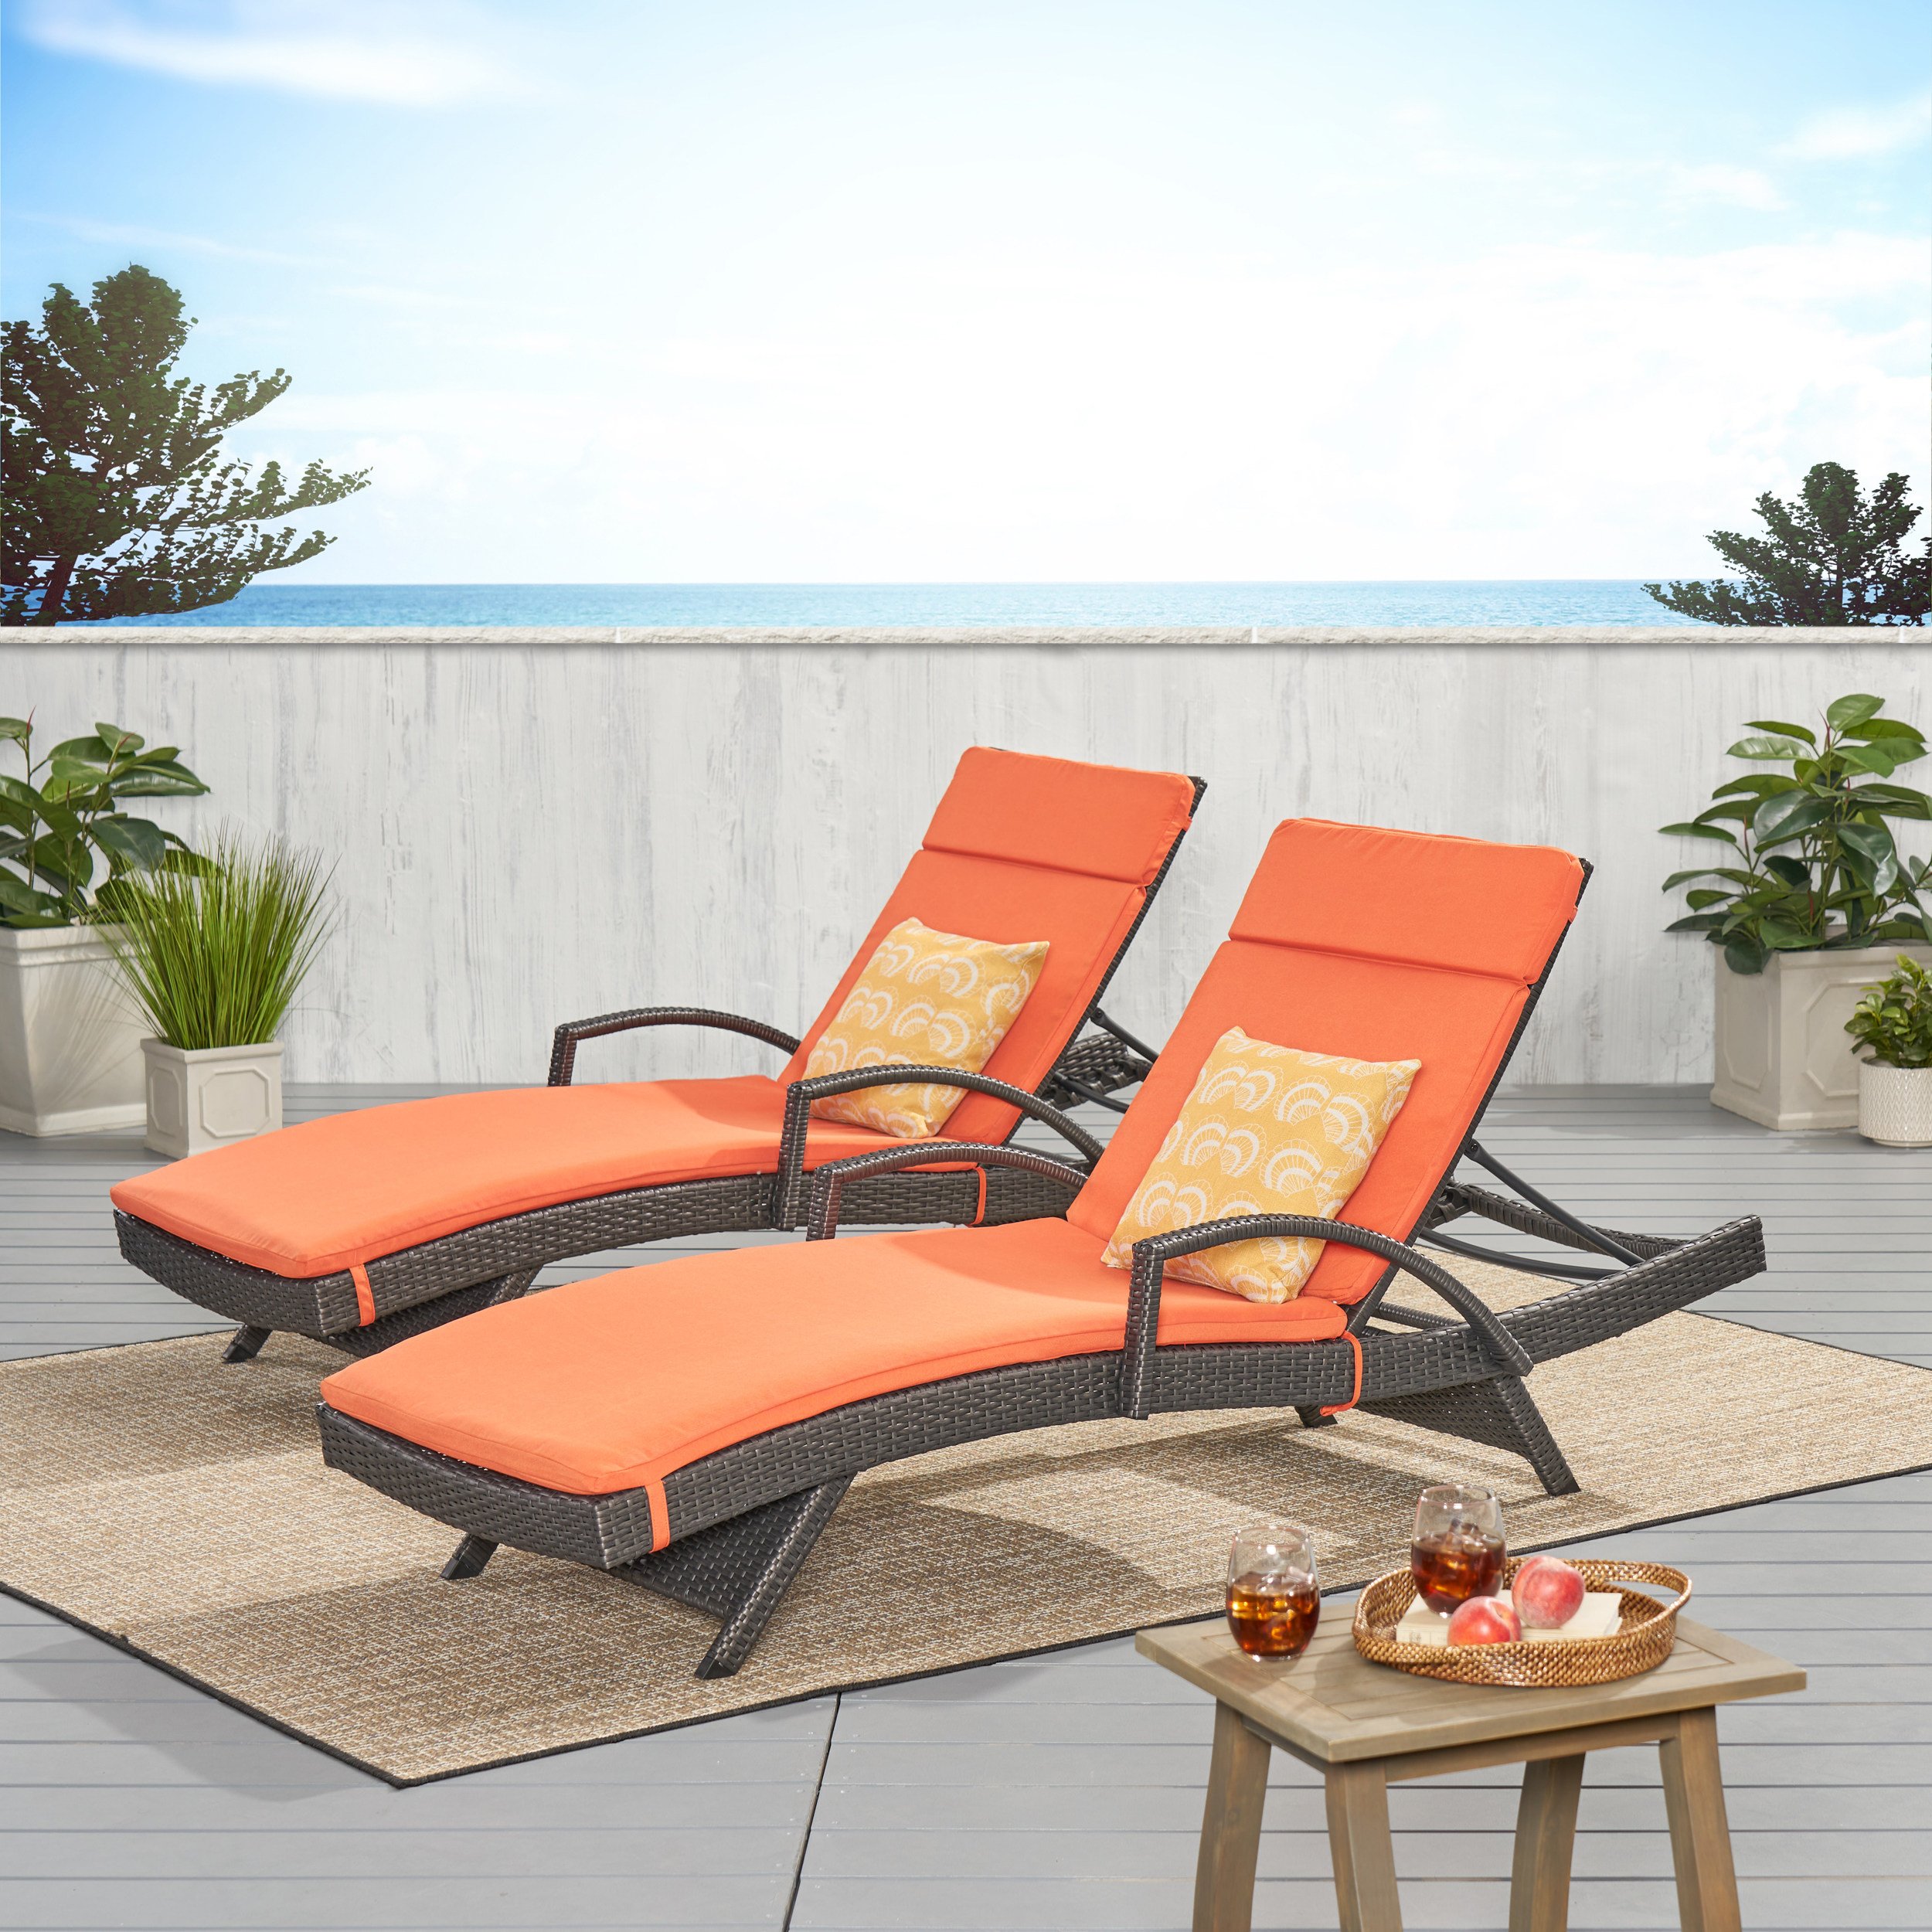 Soleil Outdoor Wicker Chaise Lounges With Water Resistant Cushions (Set Of 2) - Blue